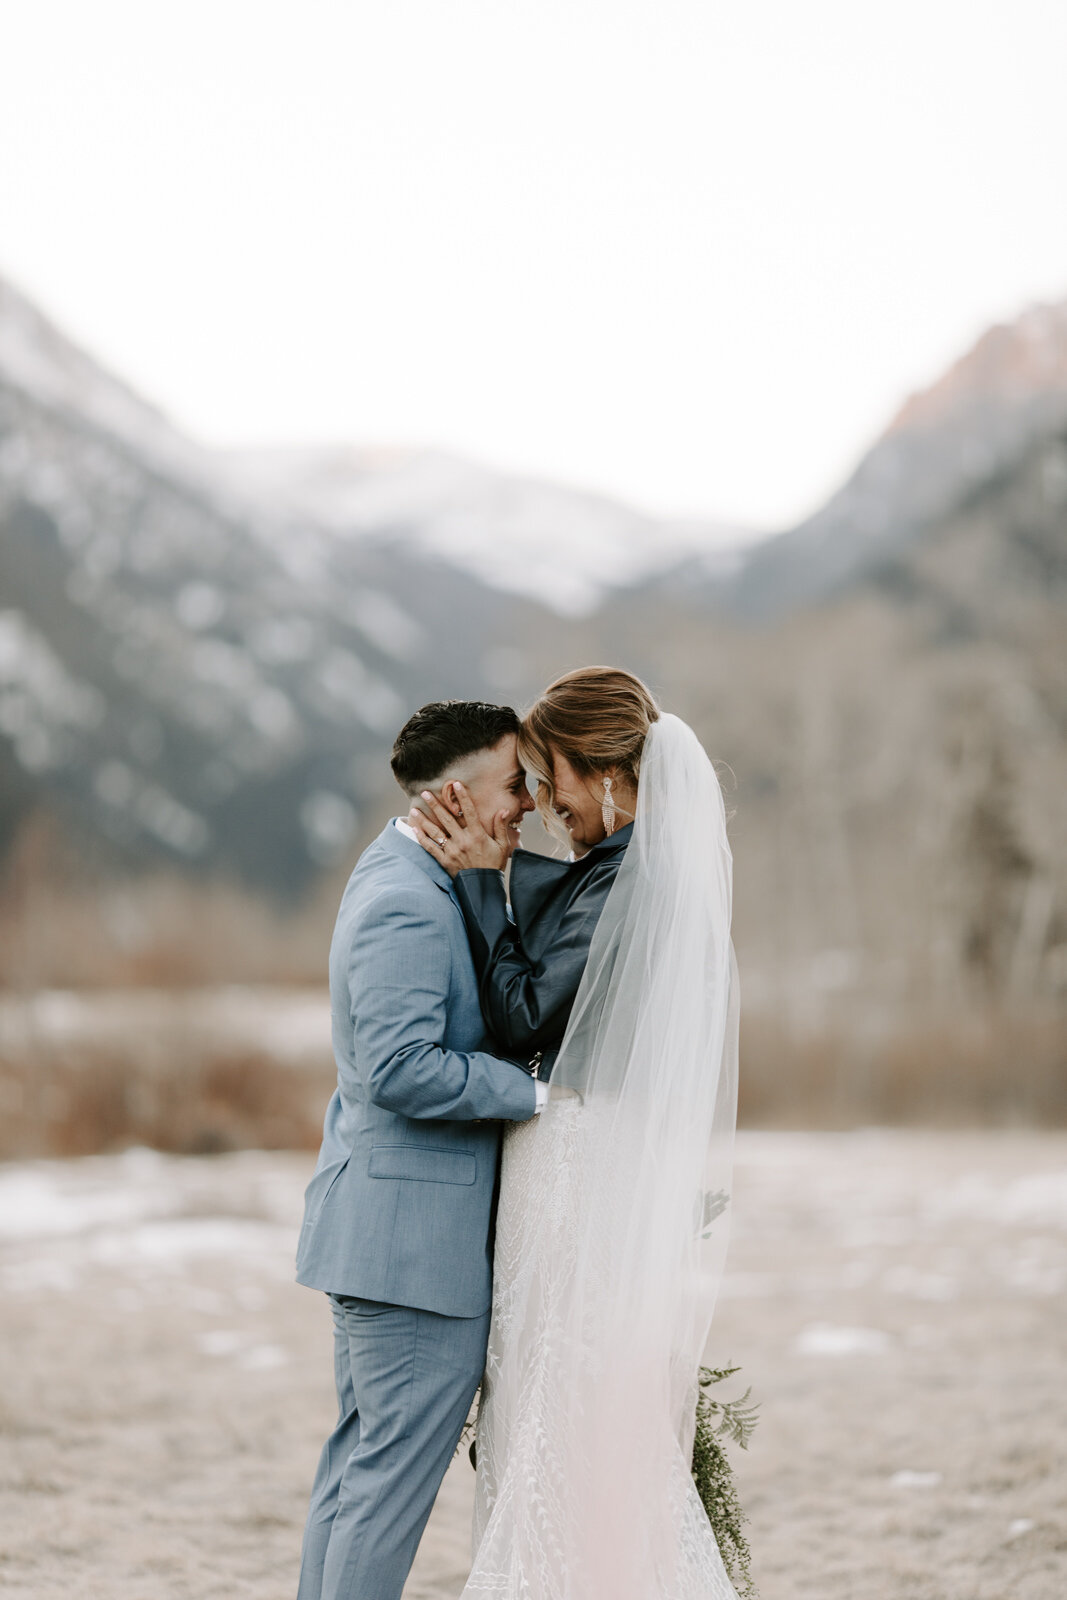 LQBTQ engaged in intimate connection during winter elopement in Rocky Mountain National Park in Colorado at sunset with wedding photographer Diana Coulter